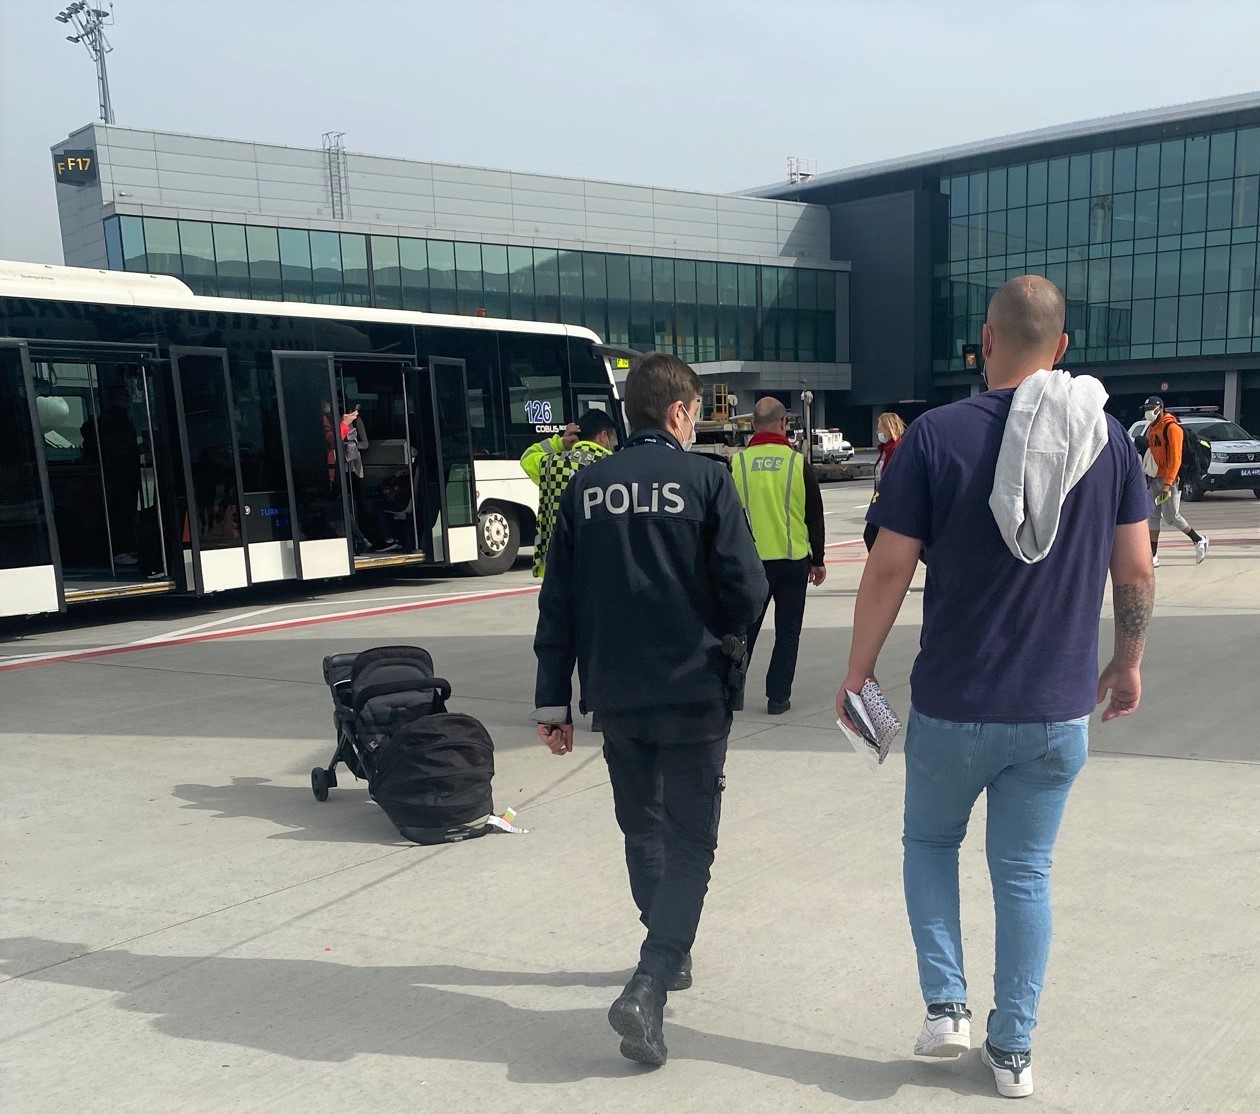  Volkan Gogebakan, 31, was flown from El Paso to Turkey on a commercial flight. Upon arrival on Friday at the Istanbul Airport, Gogebakan was turned over to Turkish officials.